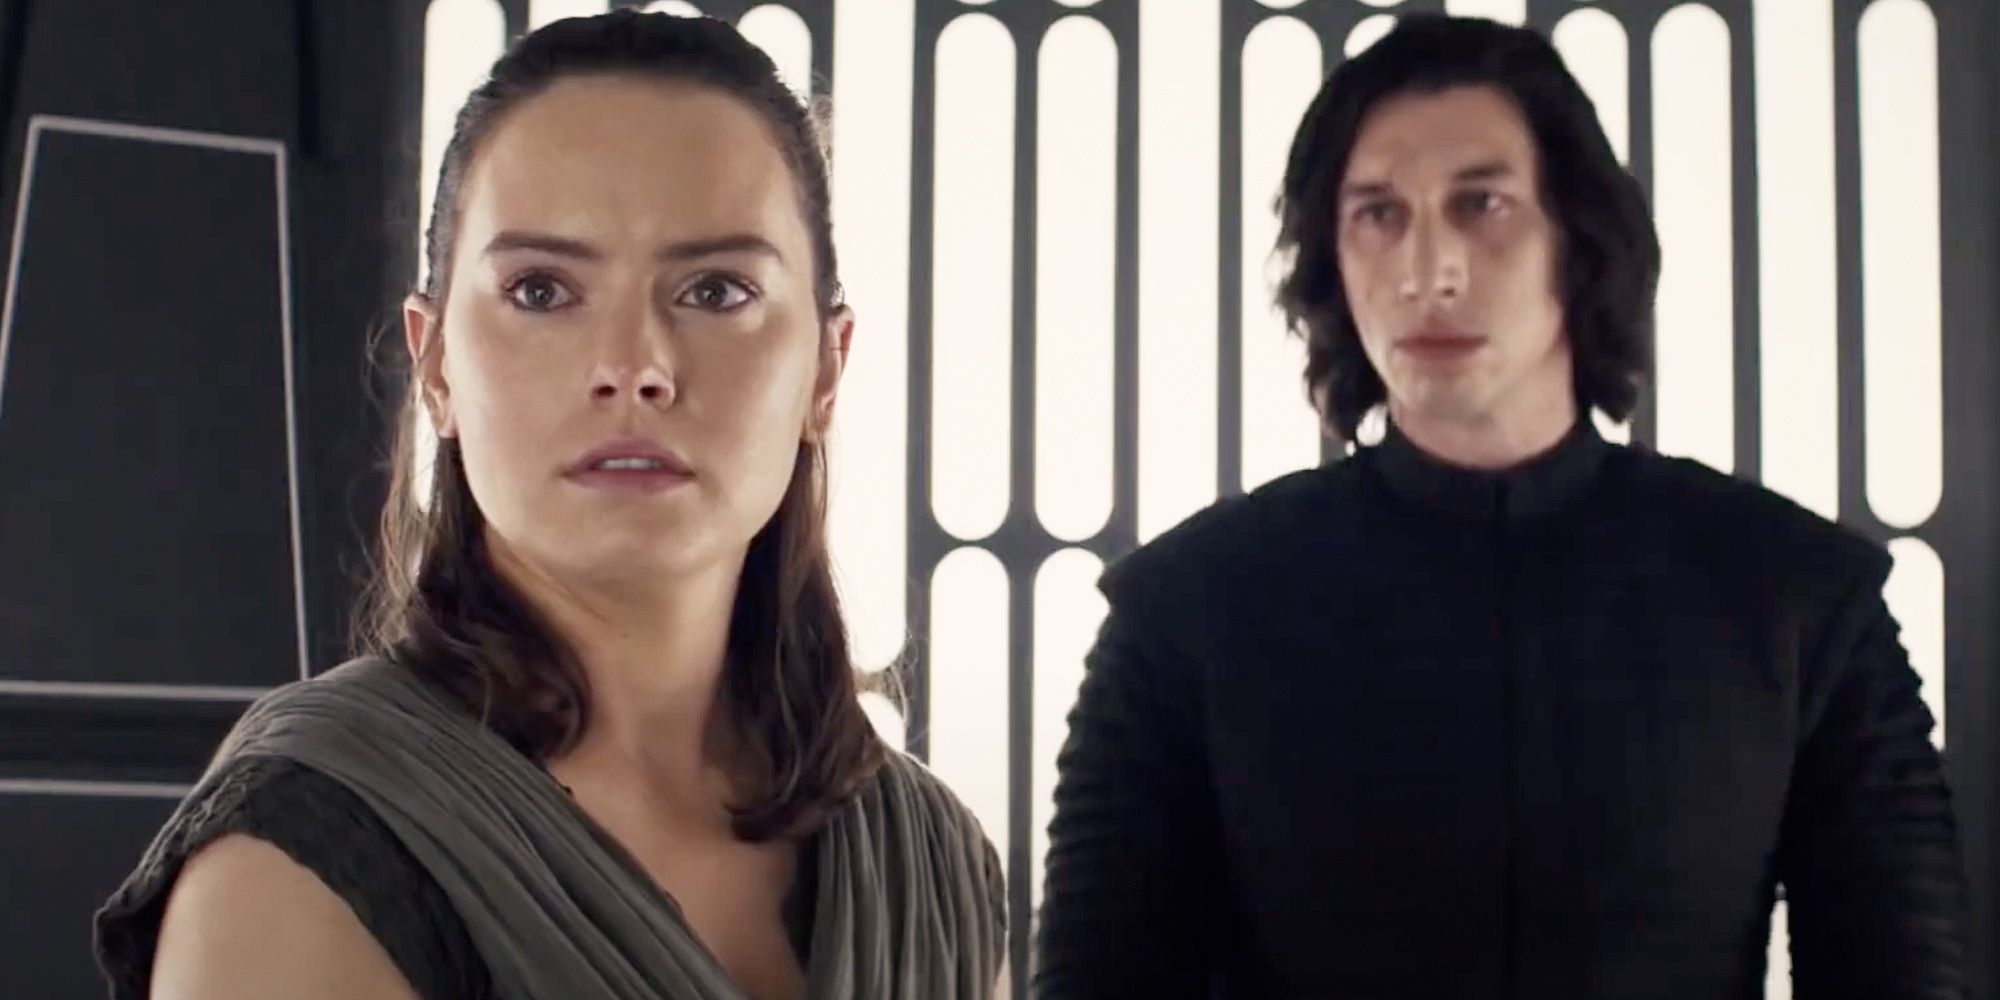 Kylo Ren Is Still The Future For New Star Wars Movies